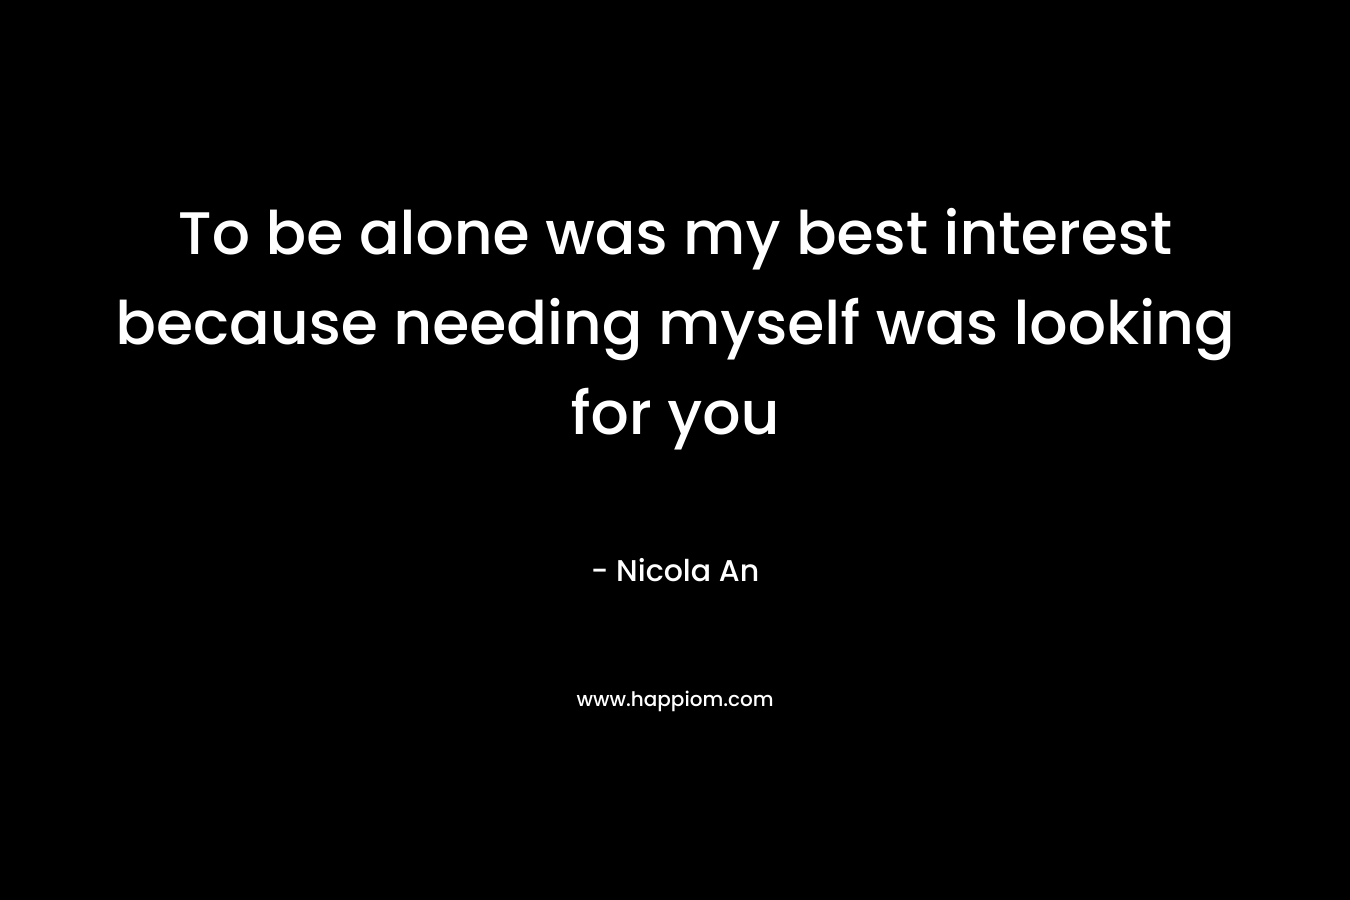 To be alone was my best interest because needing myself was looking for you – Nicola An